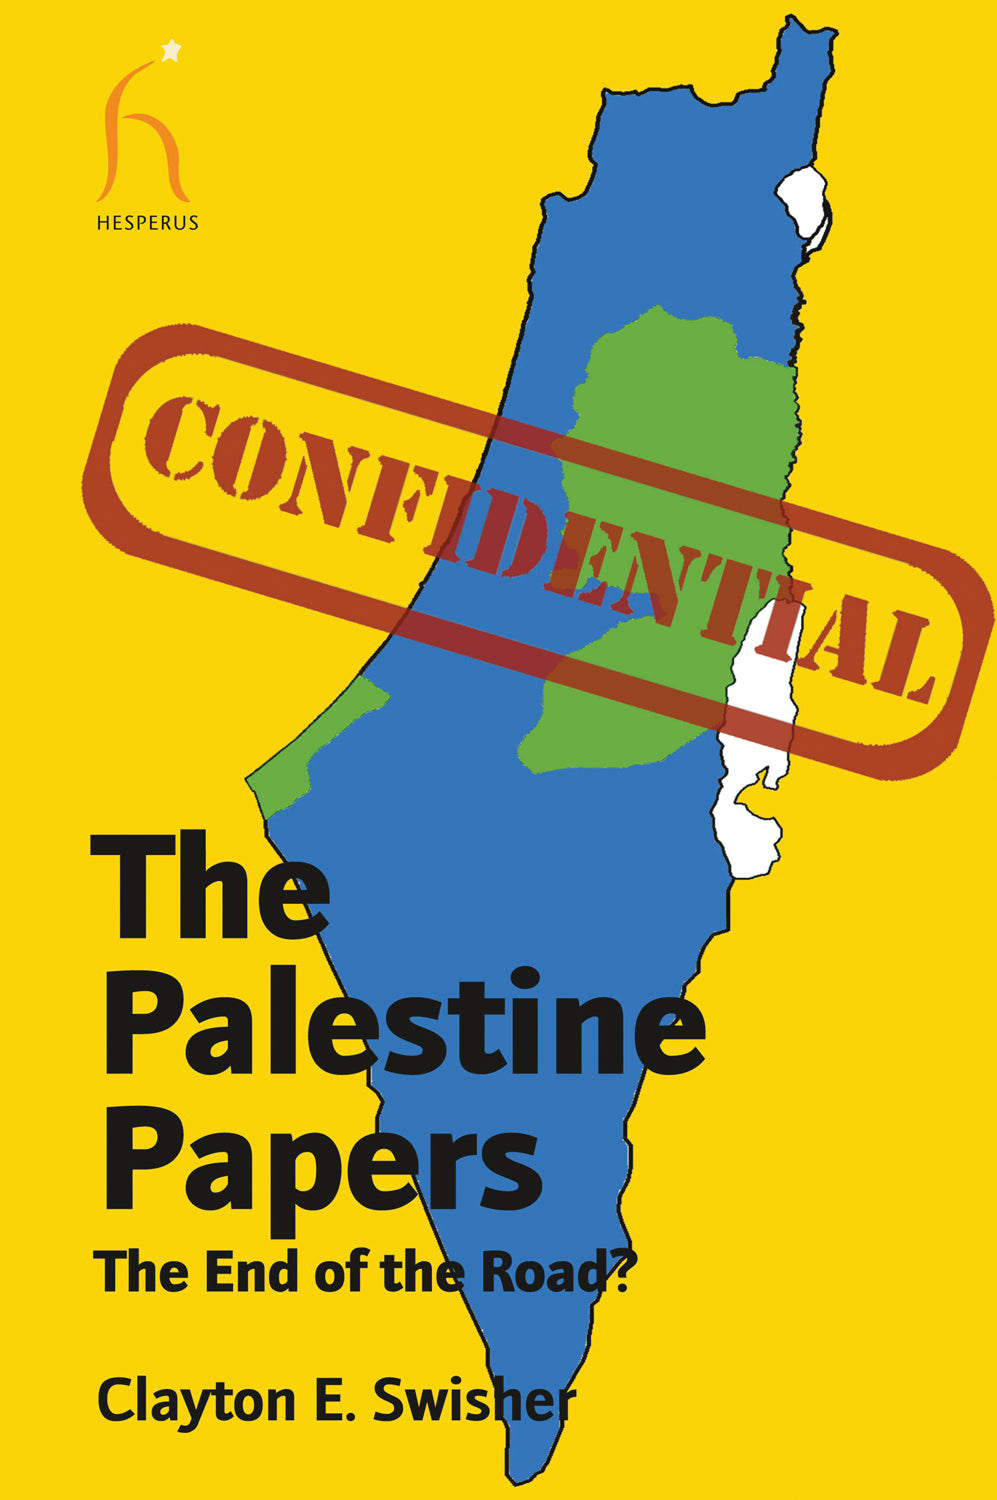 THE PALESTINE PAPERS